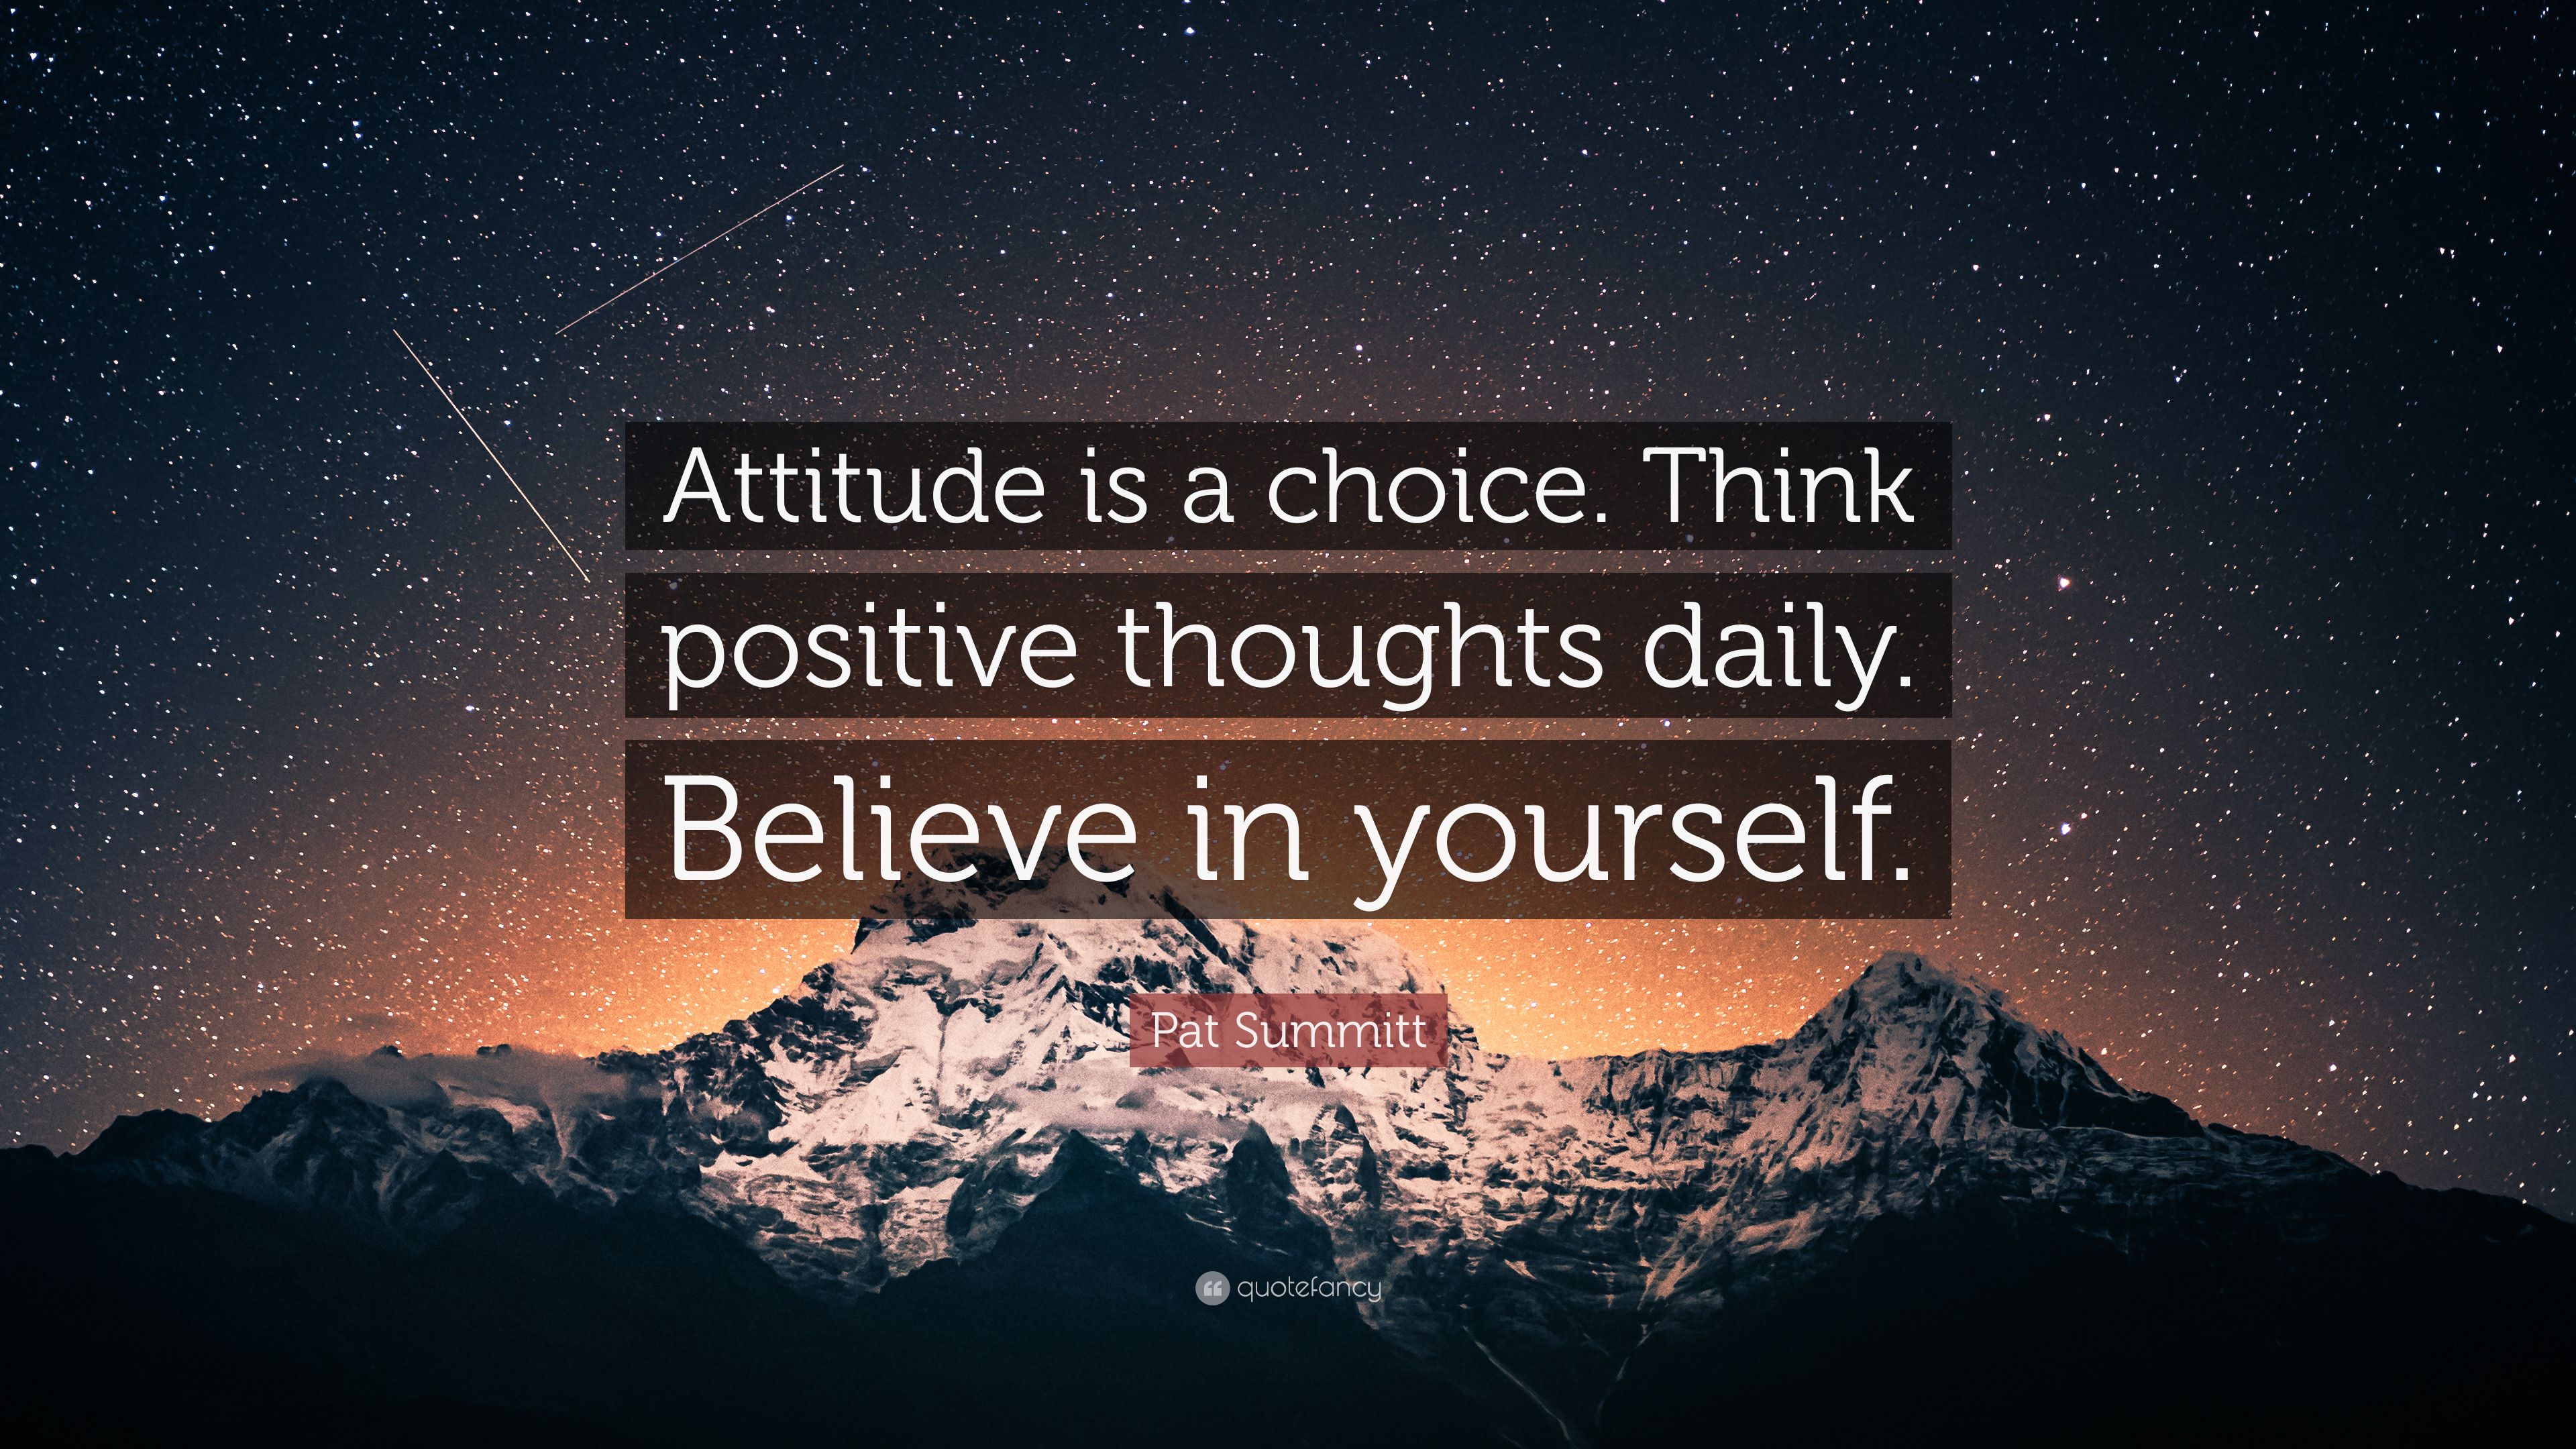 Pat Summitt Quote: “Attitude is a choice. Think positive thoughts daily. Believe in yourself.” (9 wallpaper)